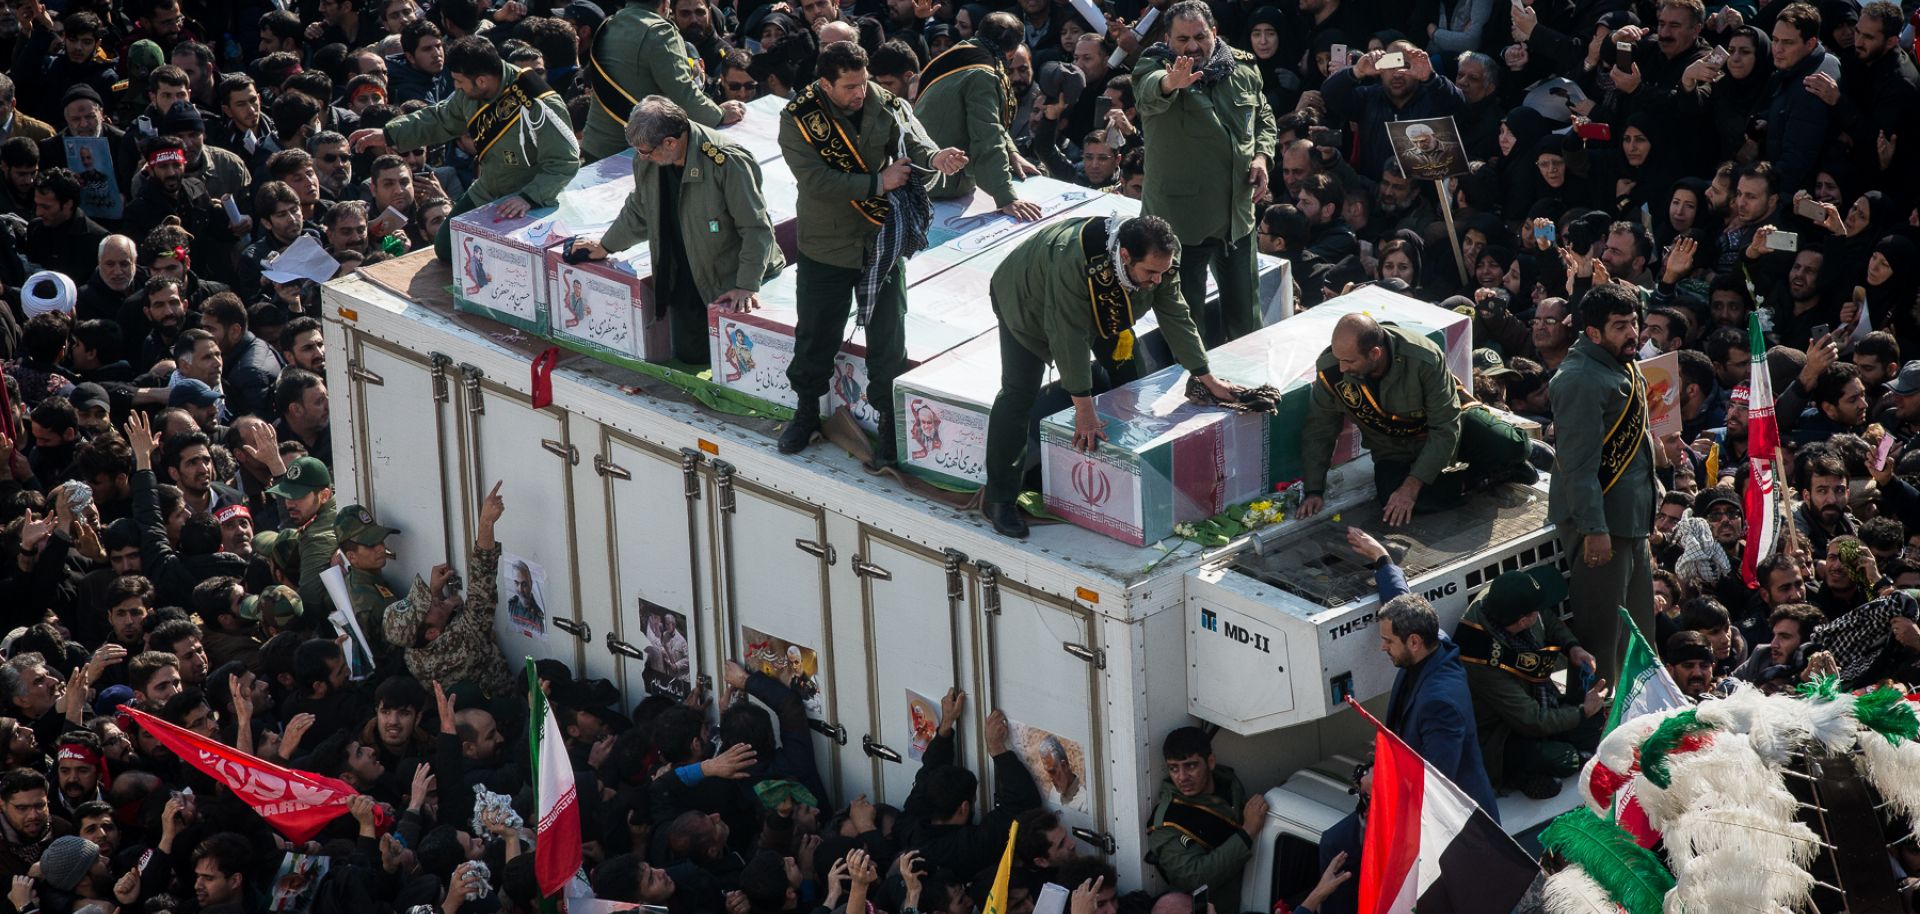 The funeral procession for IRGC-Quds Force head Qassem Soleimani on Jan. 6, 2020, in Tehran, Iran, after his Jan. 3 death in a U.S. airstrike.